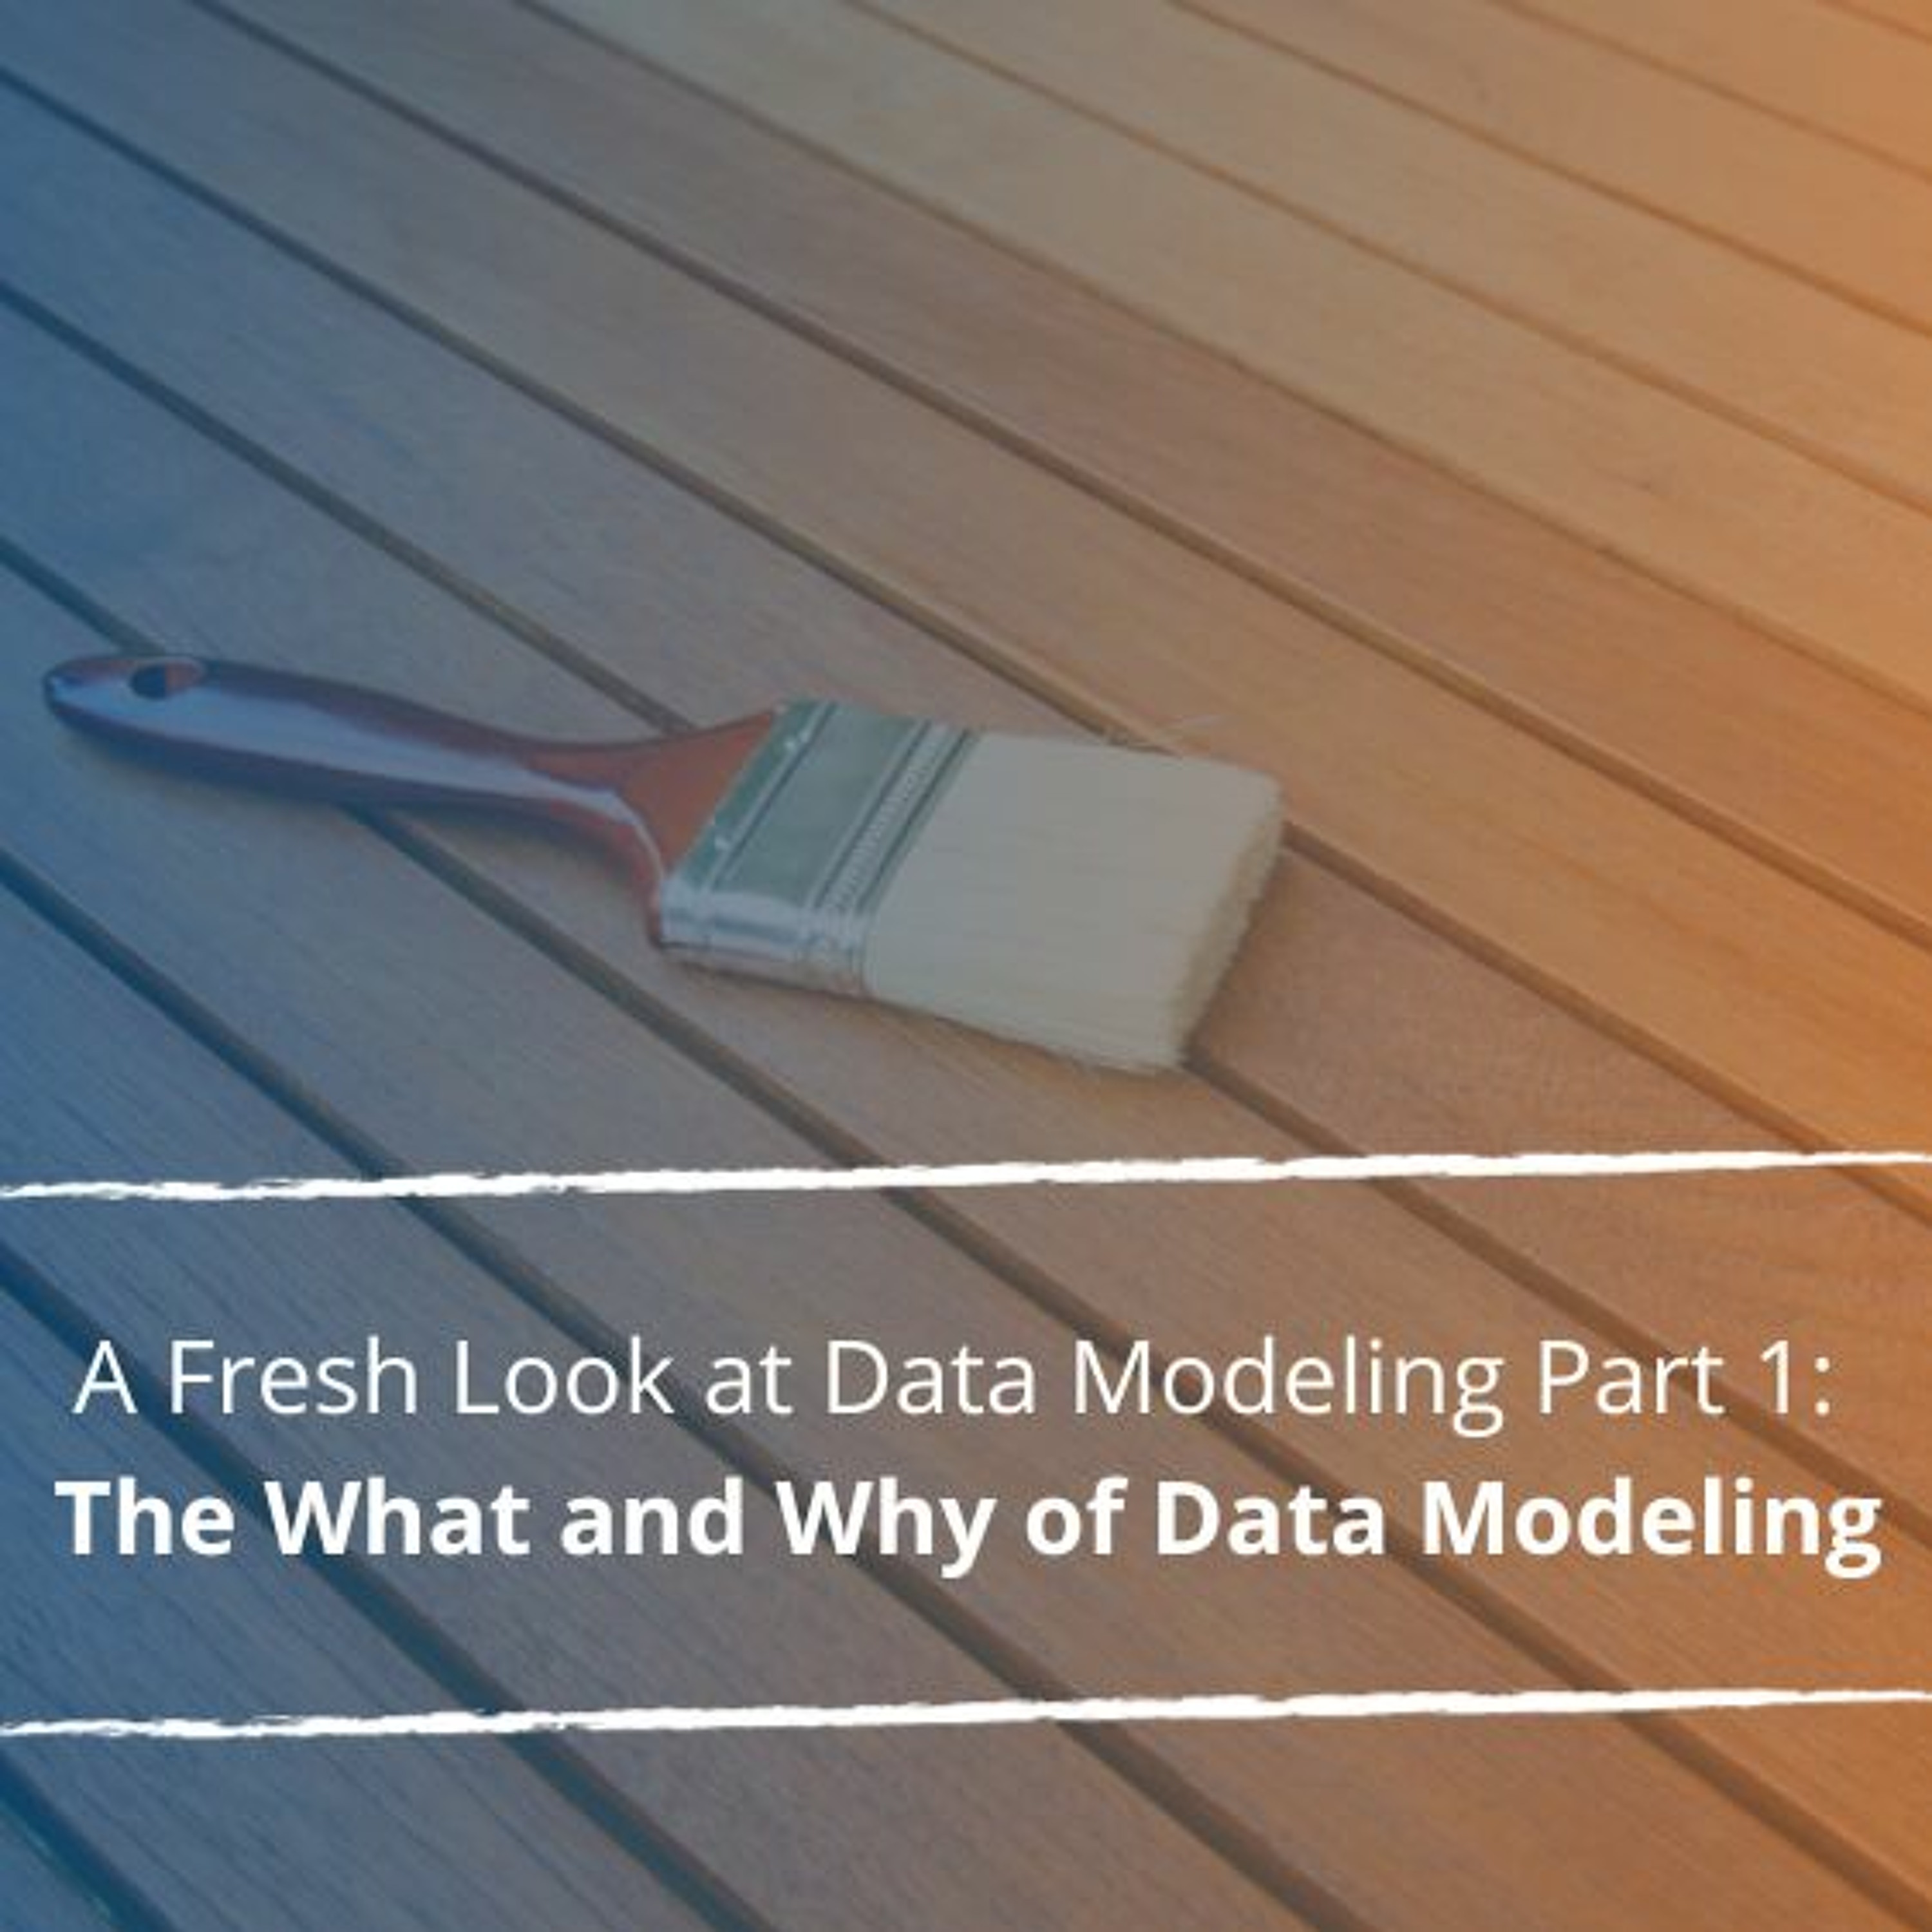 A Fresh Look at Data Modeling Part 1: The What and Why of Data Modeling - Audio Blog